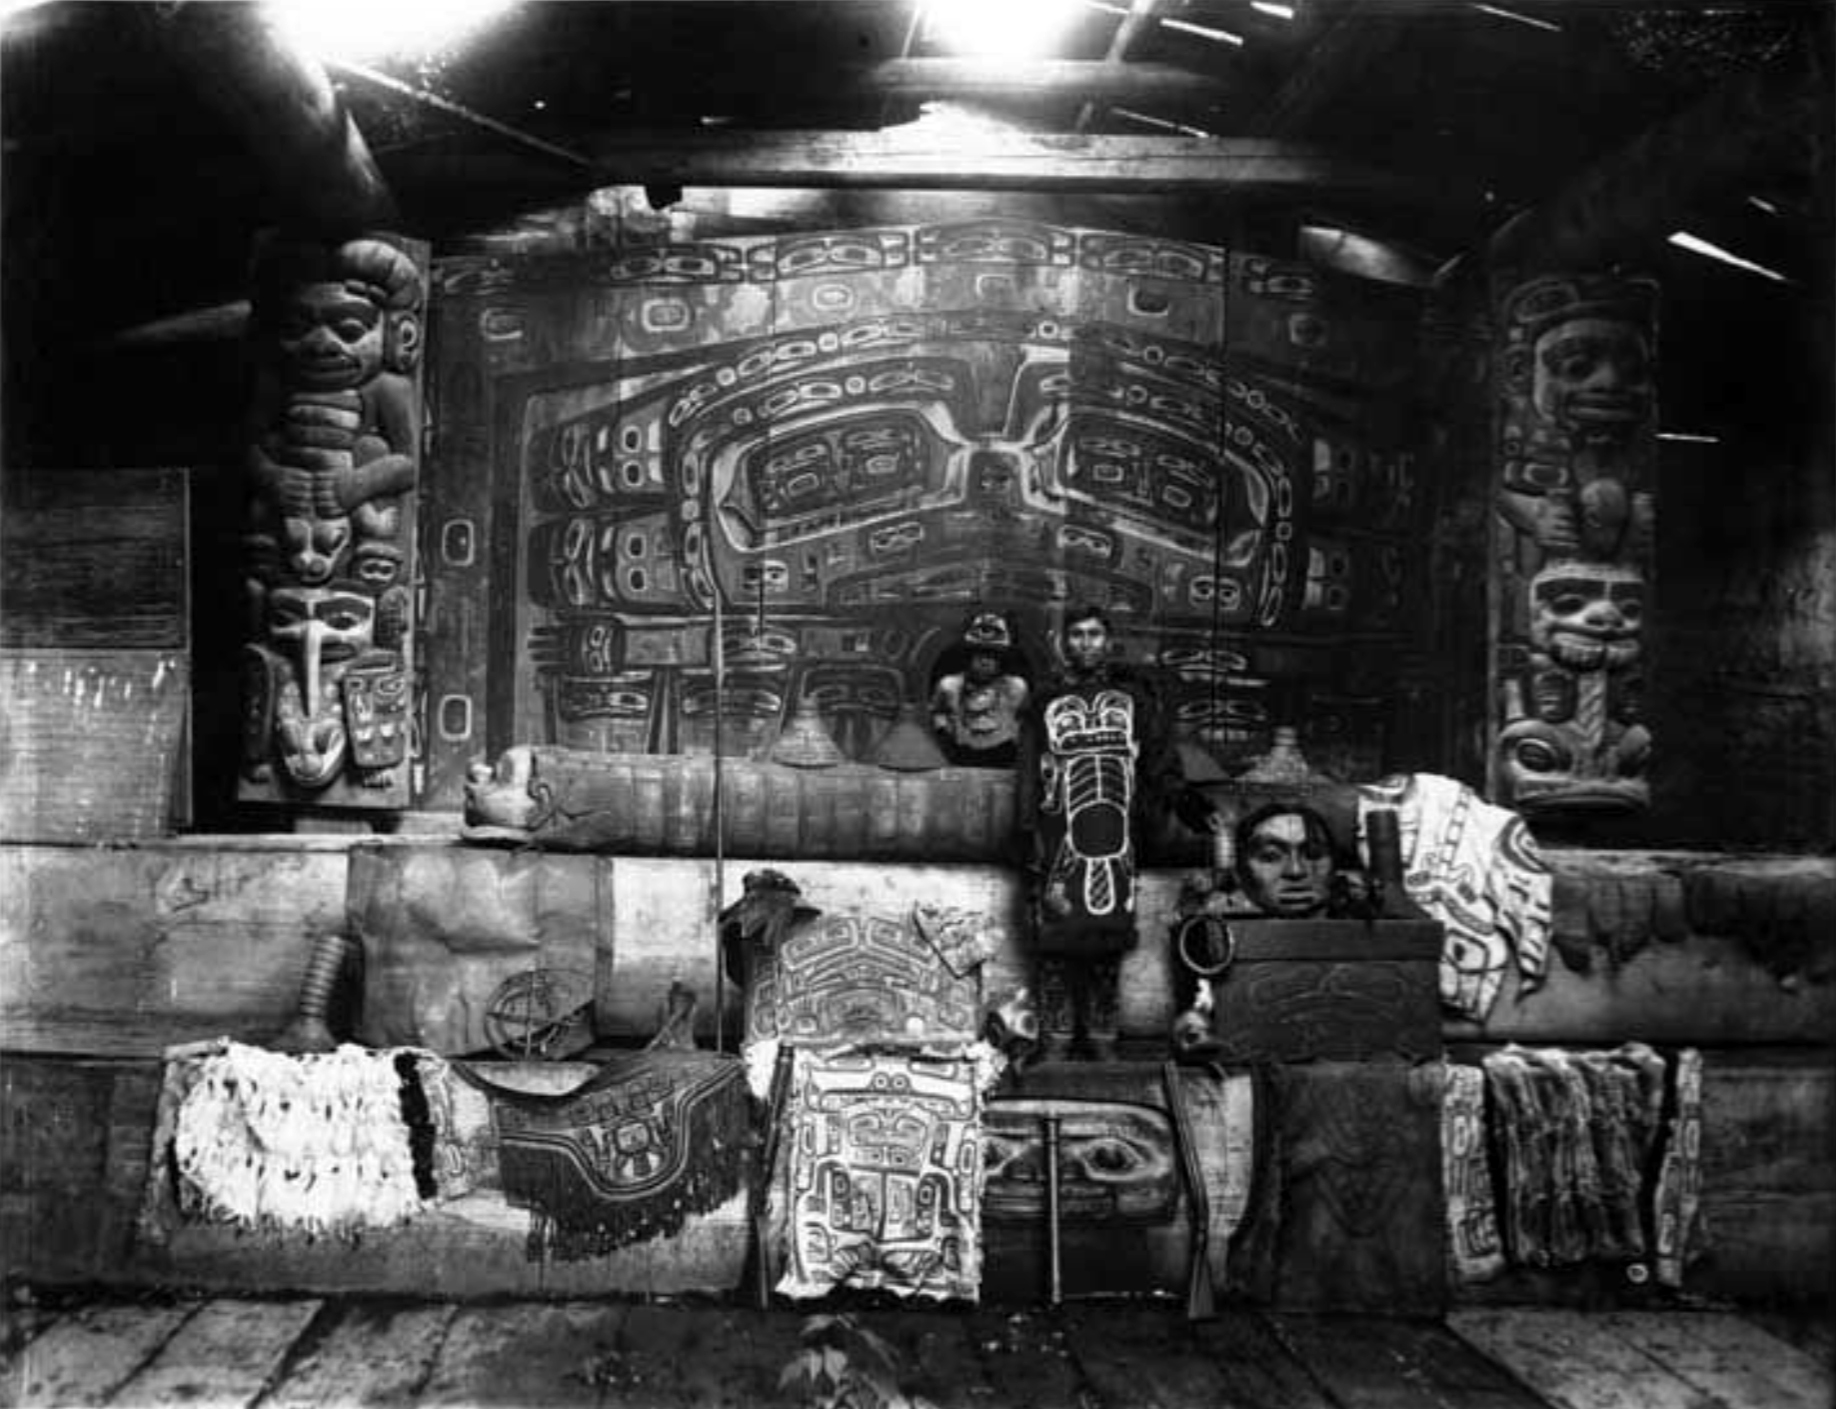 Interior of Yáay Hít (Whale House) of the Tlingit Ghaaanaxhteidí clan, Klukwan, Alaska, c. 1895. The photo shows the at.óow (Tlingit clan property) of the Ghaaanaxhteidí clan, including the Séew Xh'éen (Rain Screen), Wormwood house post (left), Strong Man house post (right), and tunics, bentwood boxes, and clan hats. Photo by Winter and Pond (Alaska State Libraries)